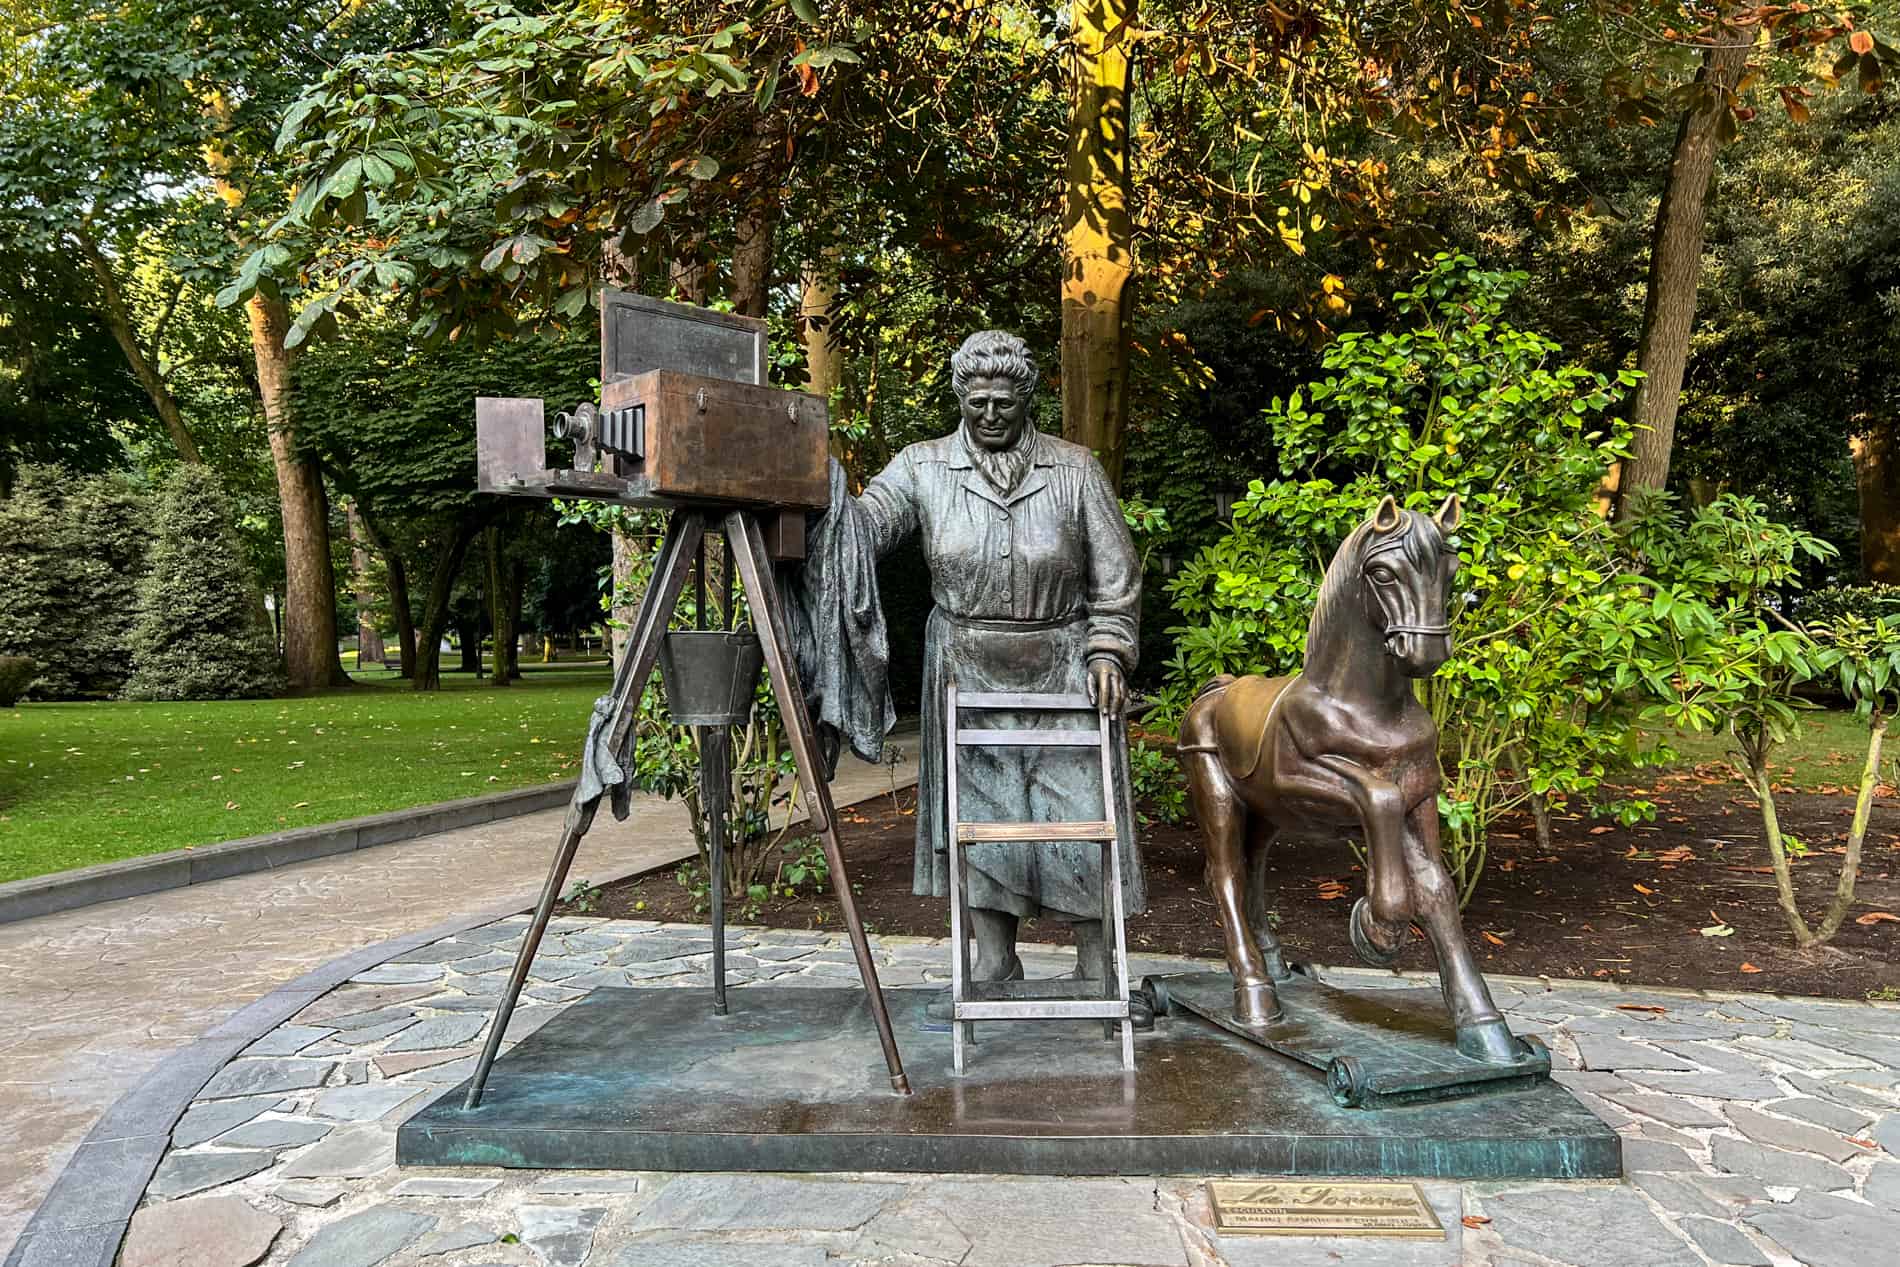 The La Torera statue in oviedo's San Francisco Park of a photographer, with a camera on a tripod, rocking horse and a chair. 